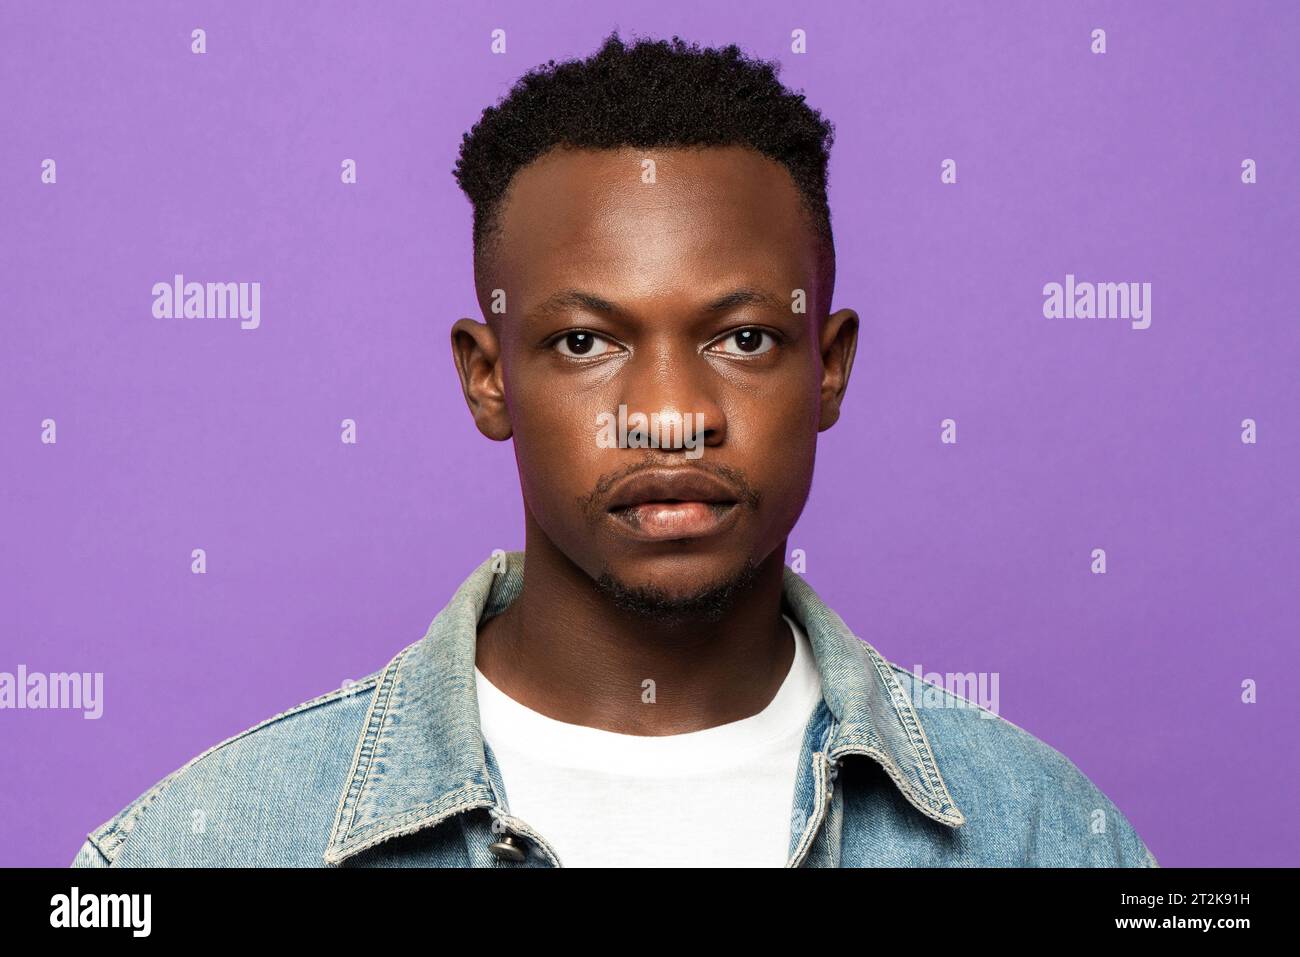 Headshot portrait of young handsome African man face looking at camera in purple color studio isolated background Stock Photo